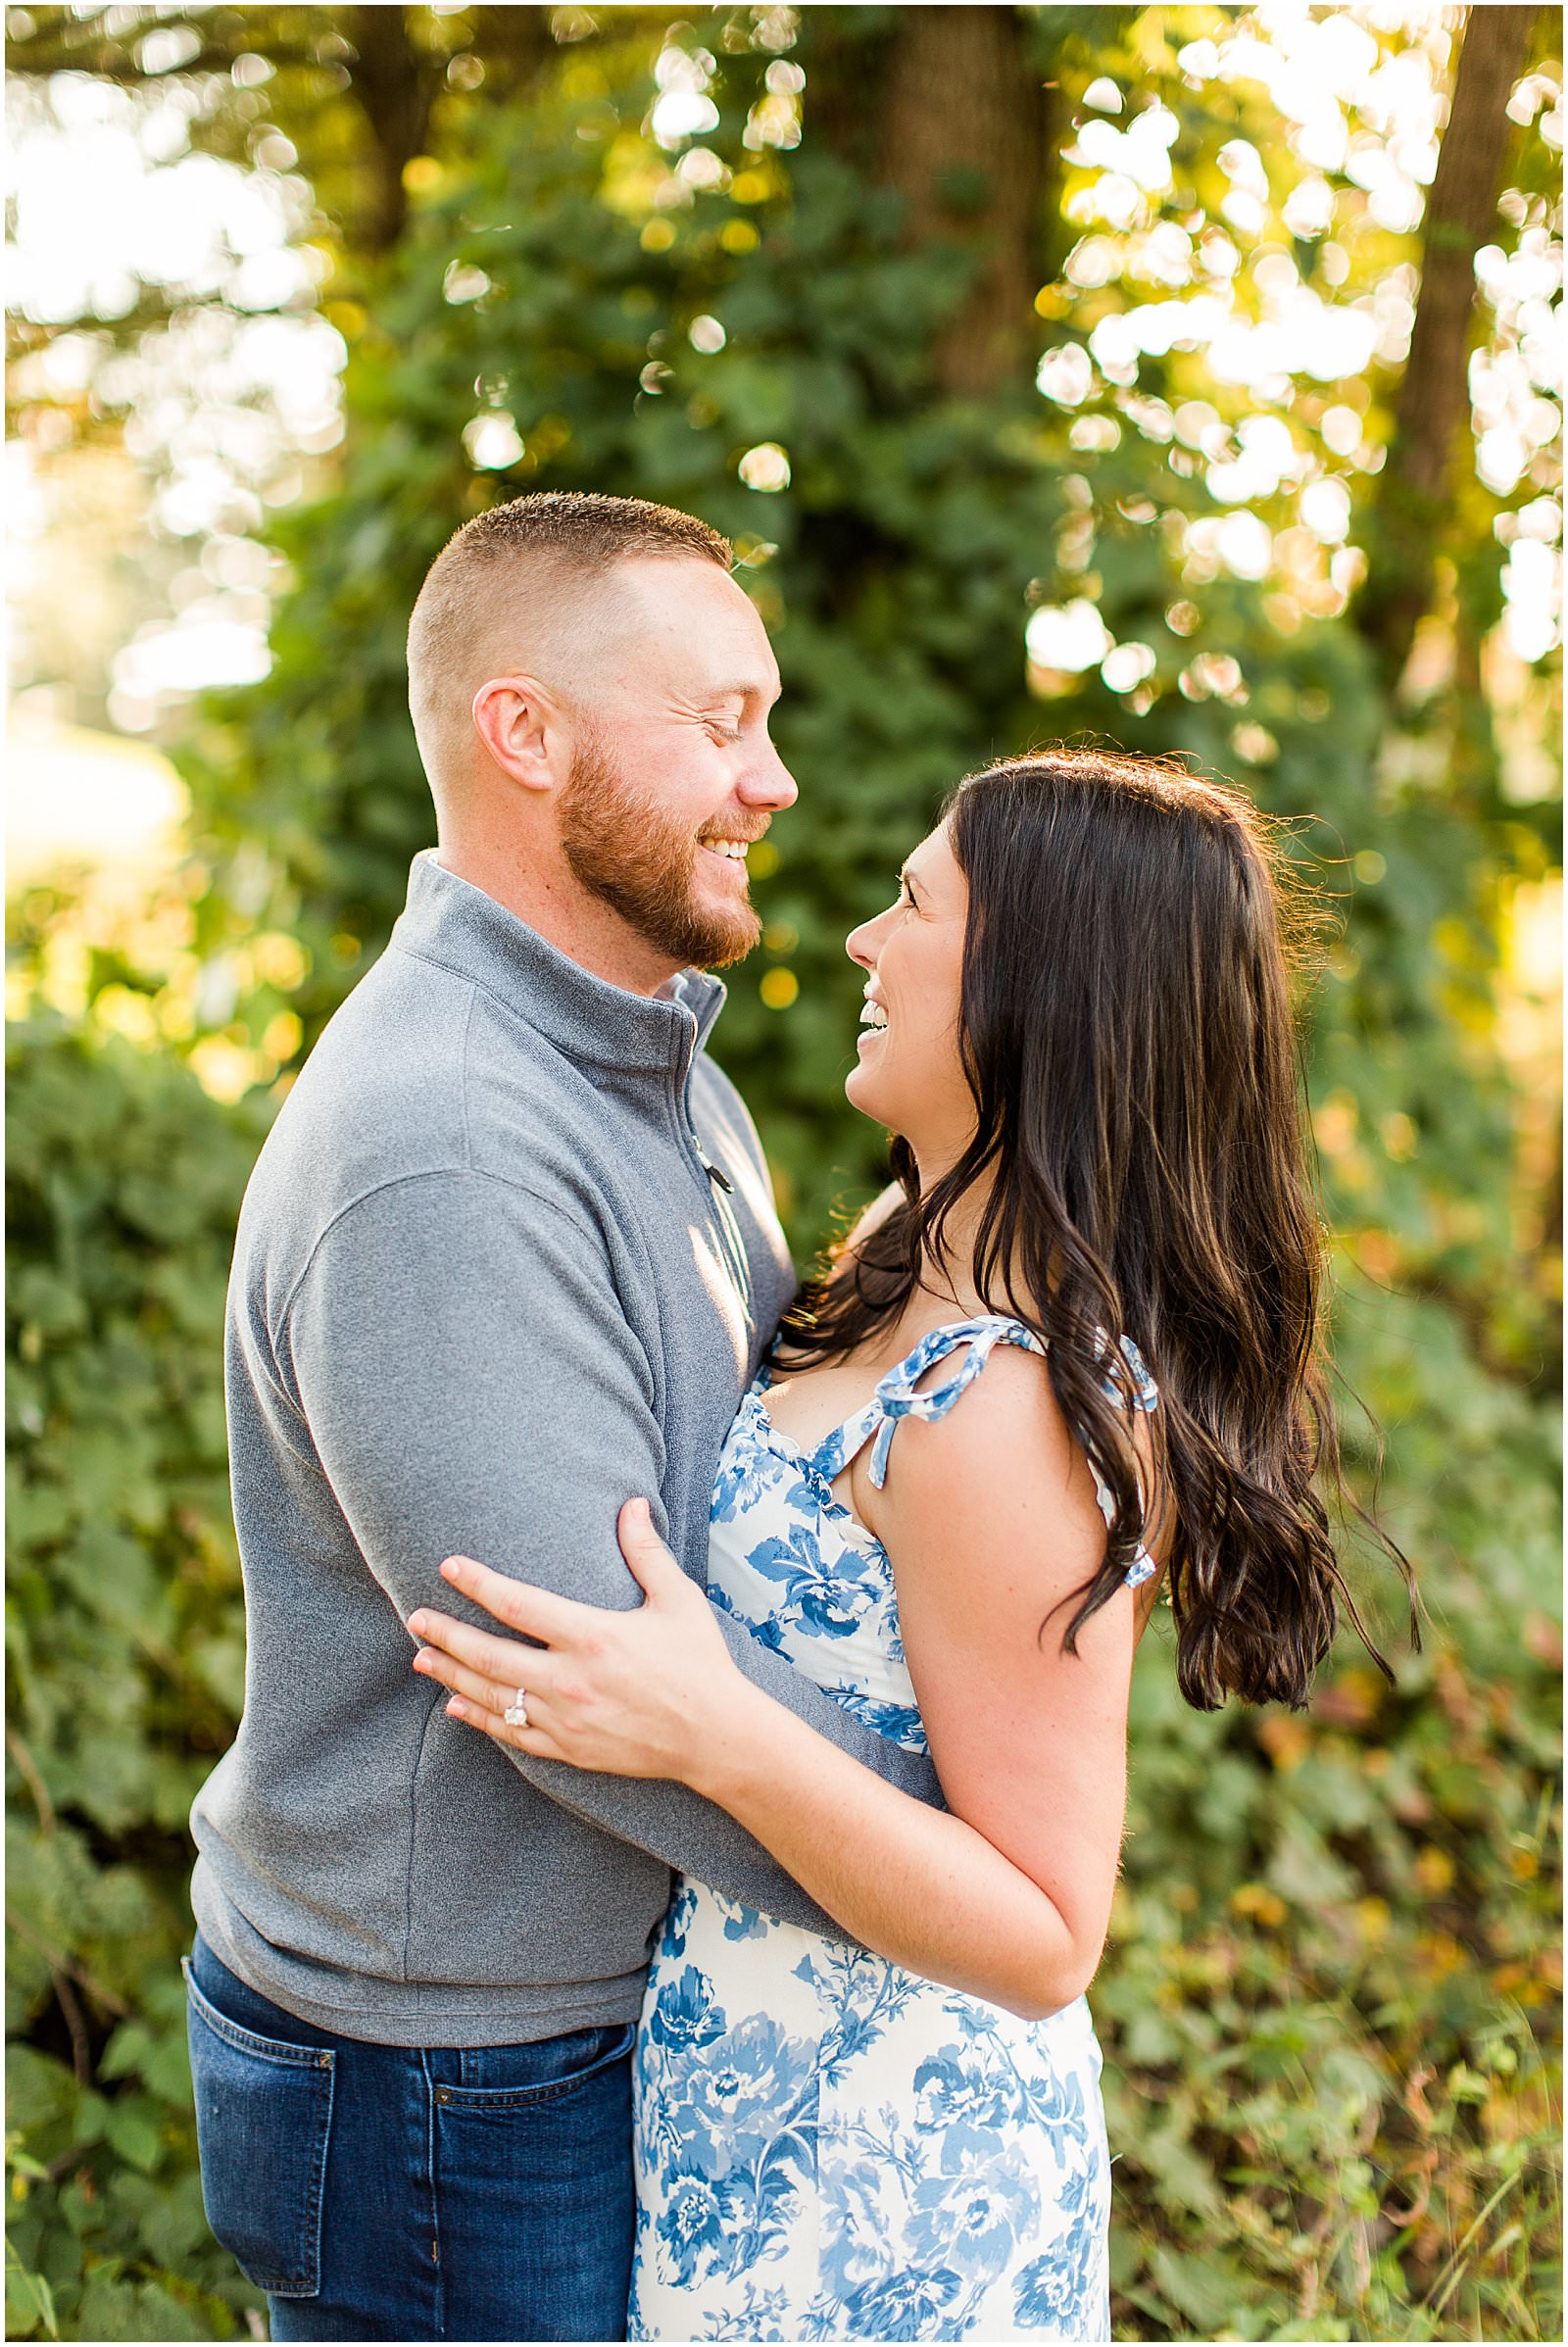 A Rolling Hills Country Club Engagement Session | Meagan and Kyle | Bret and Brandie Photography 0022.jpg